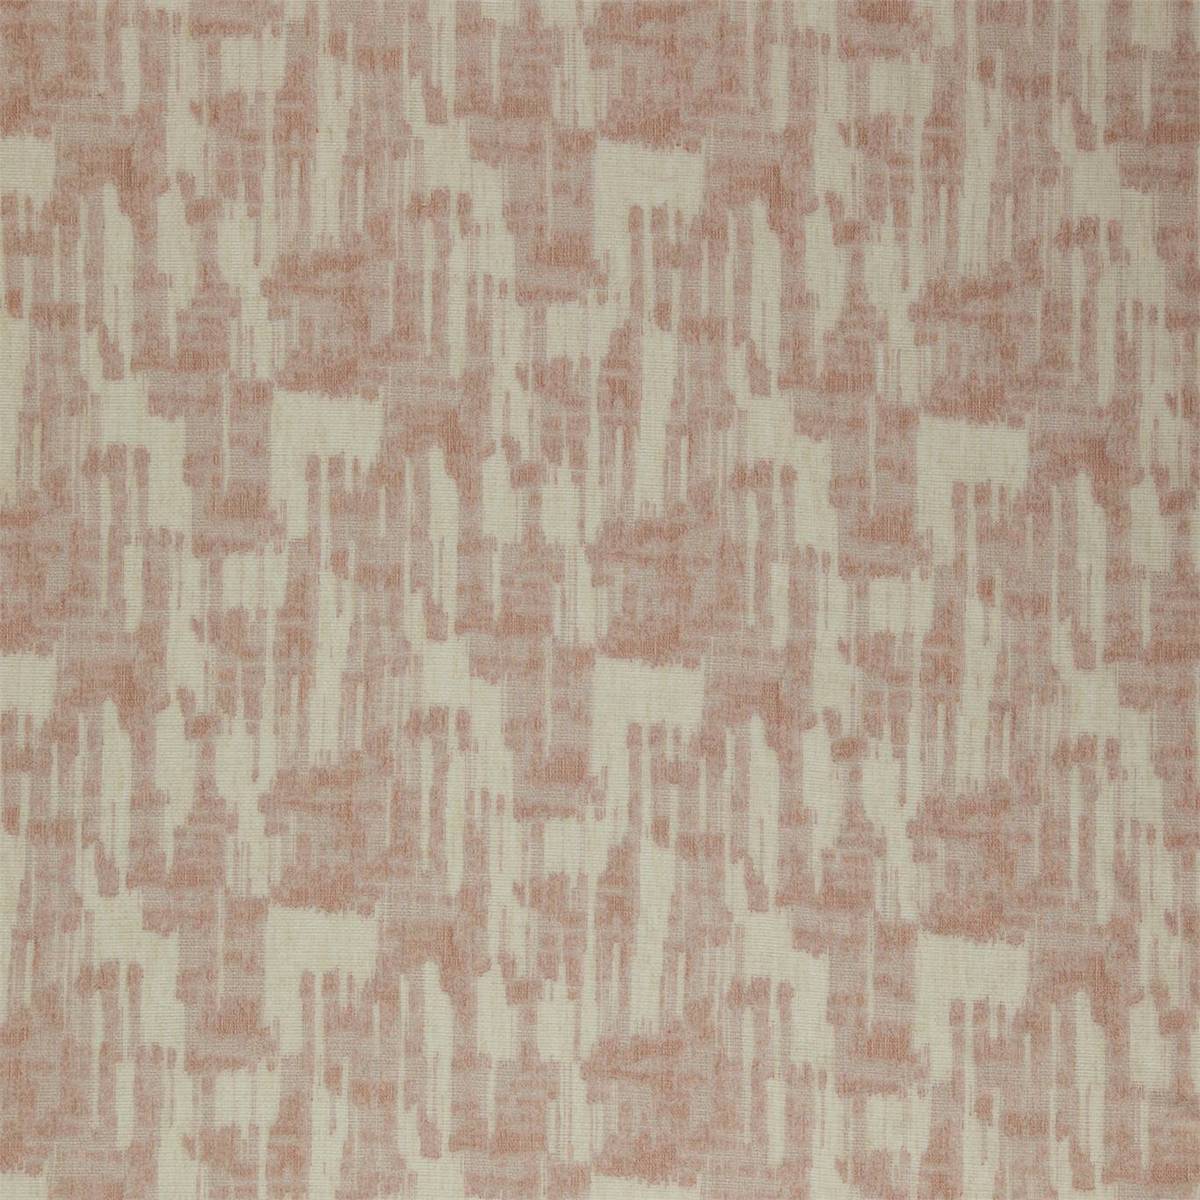 Refrain Fire Fabric by Harlequin